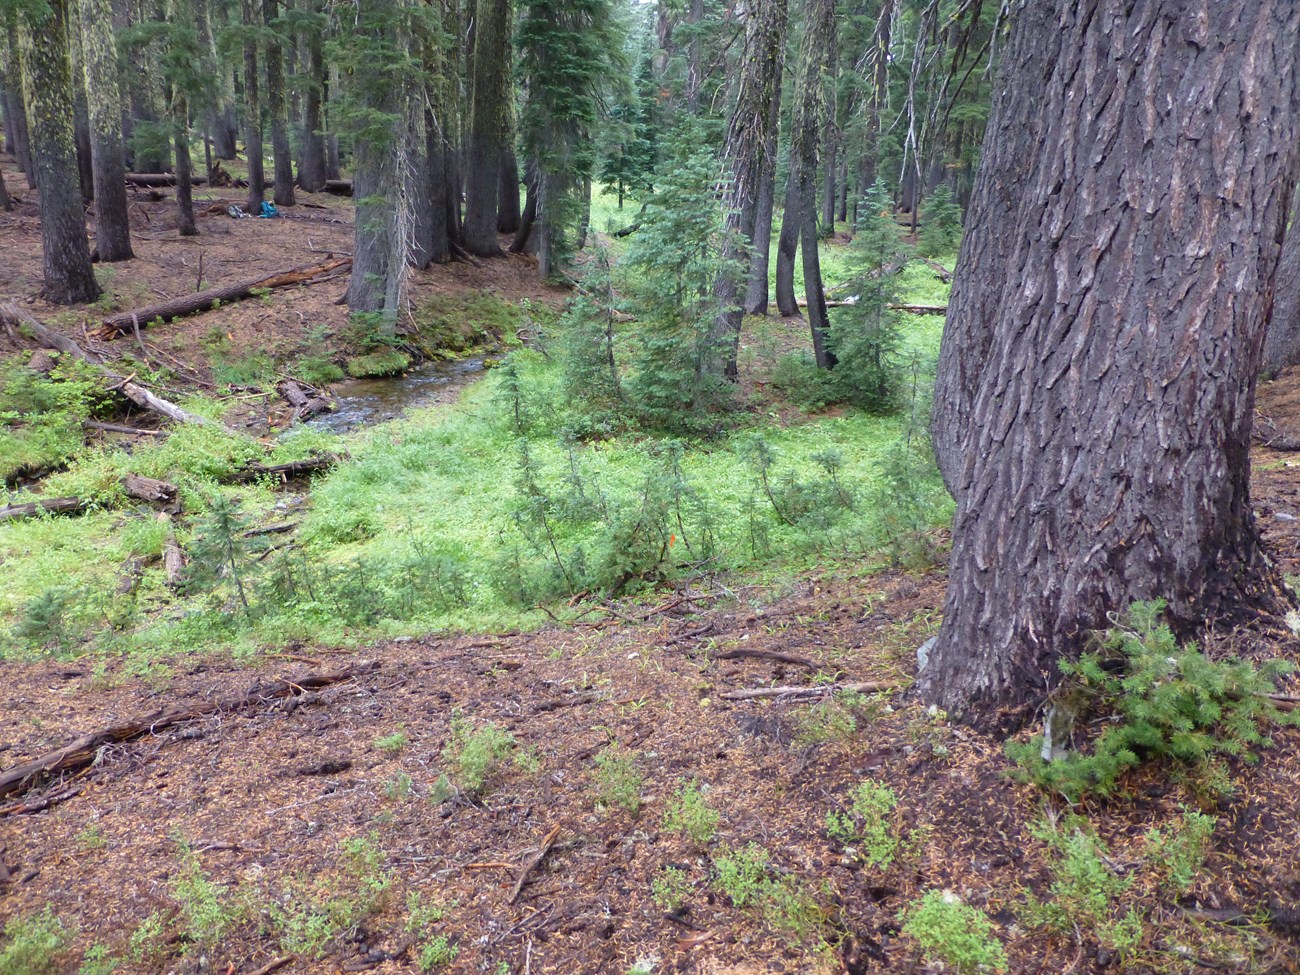 Densely vegetated stream corridor surrounded by forest with almost bare forest floor.